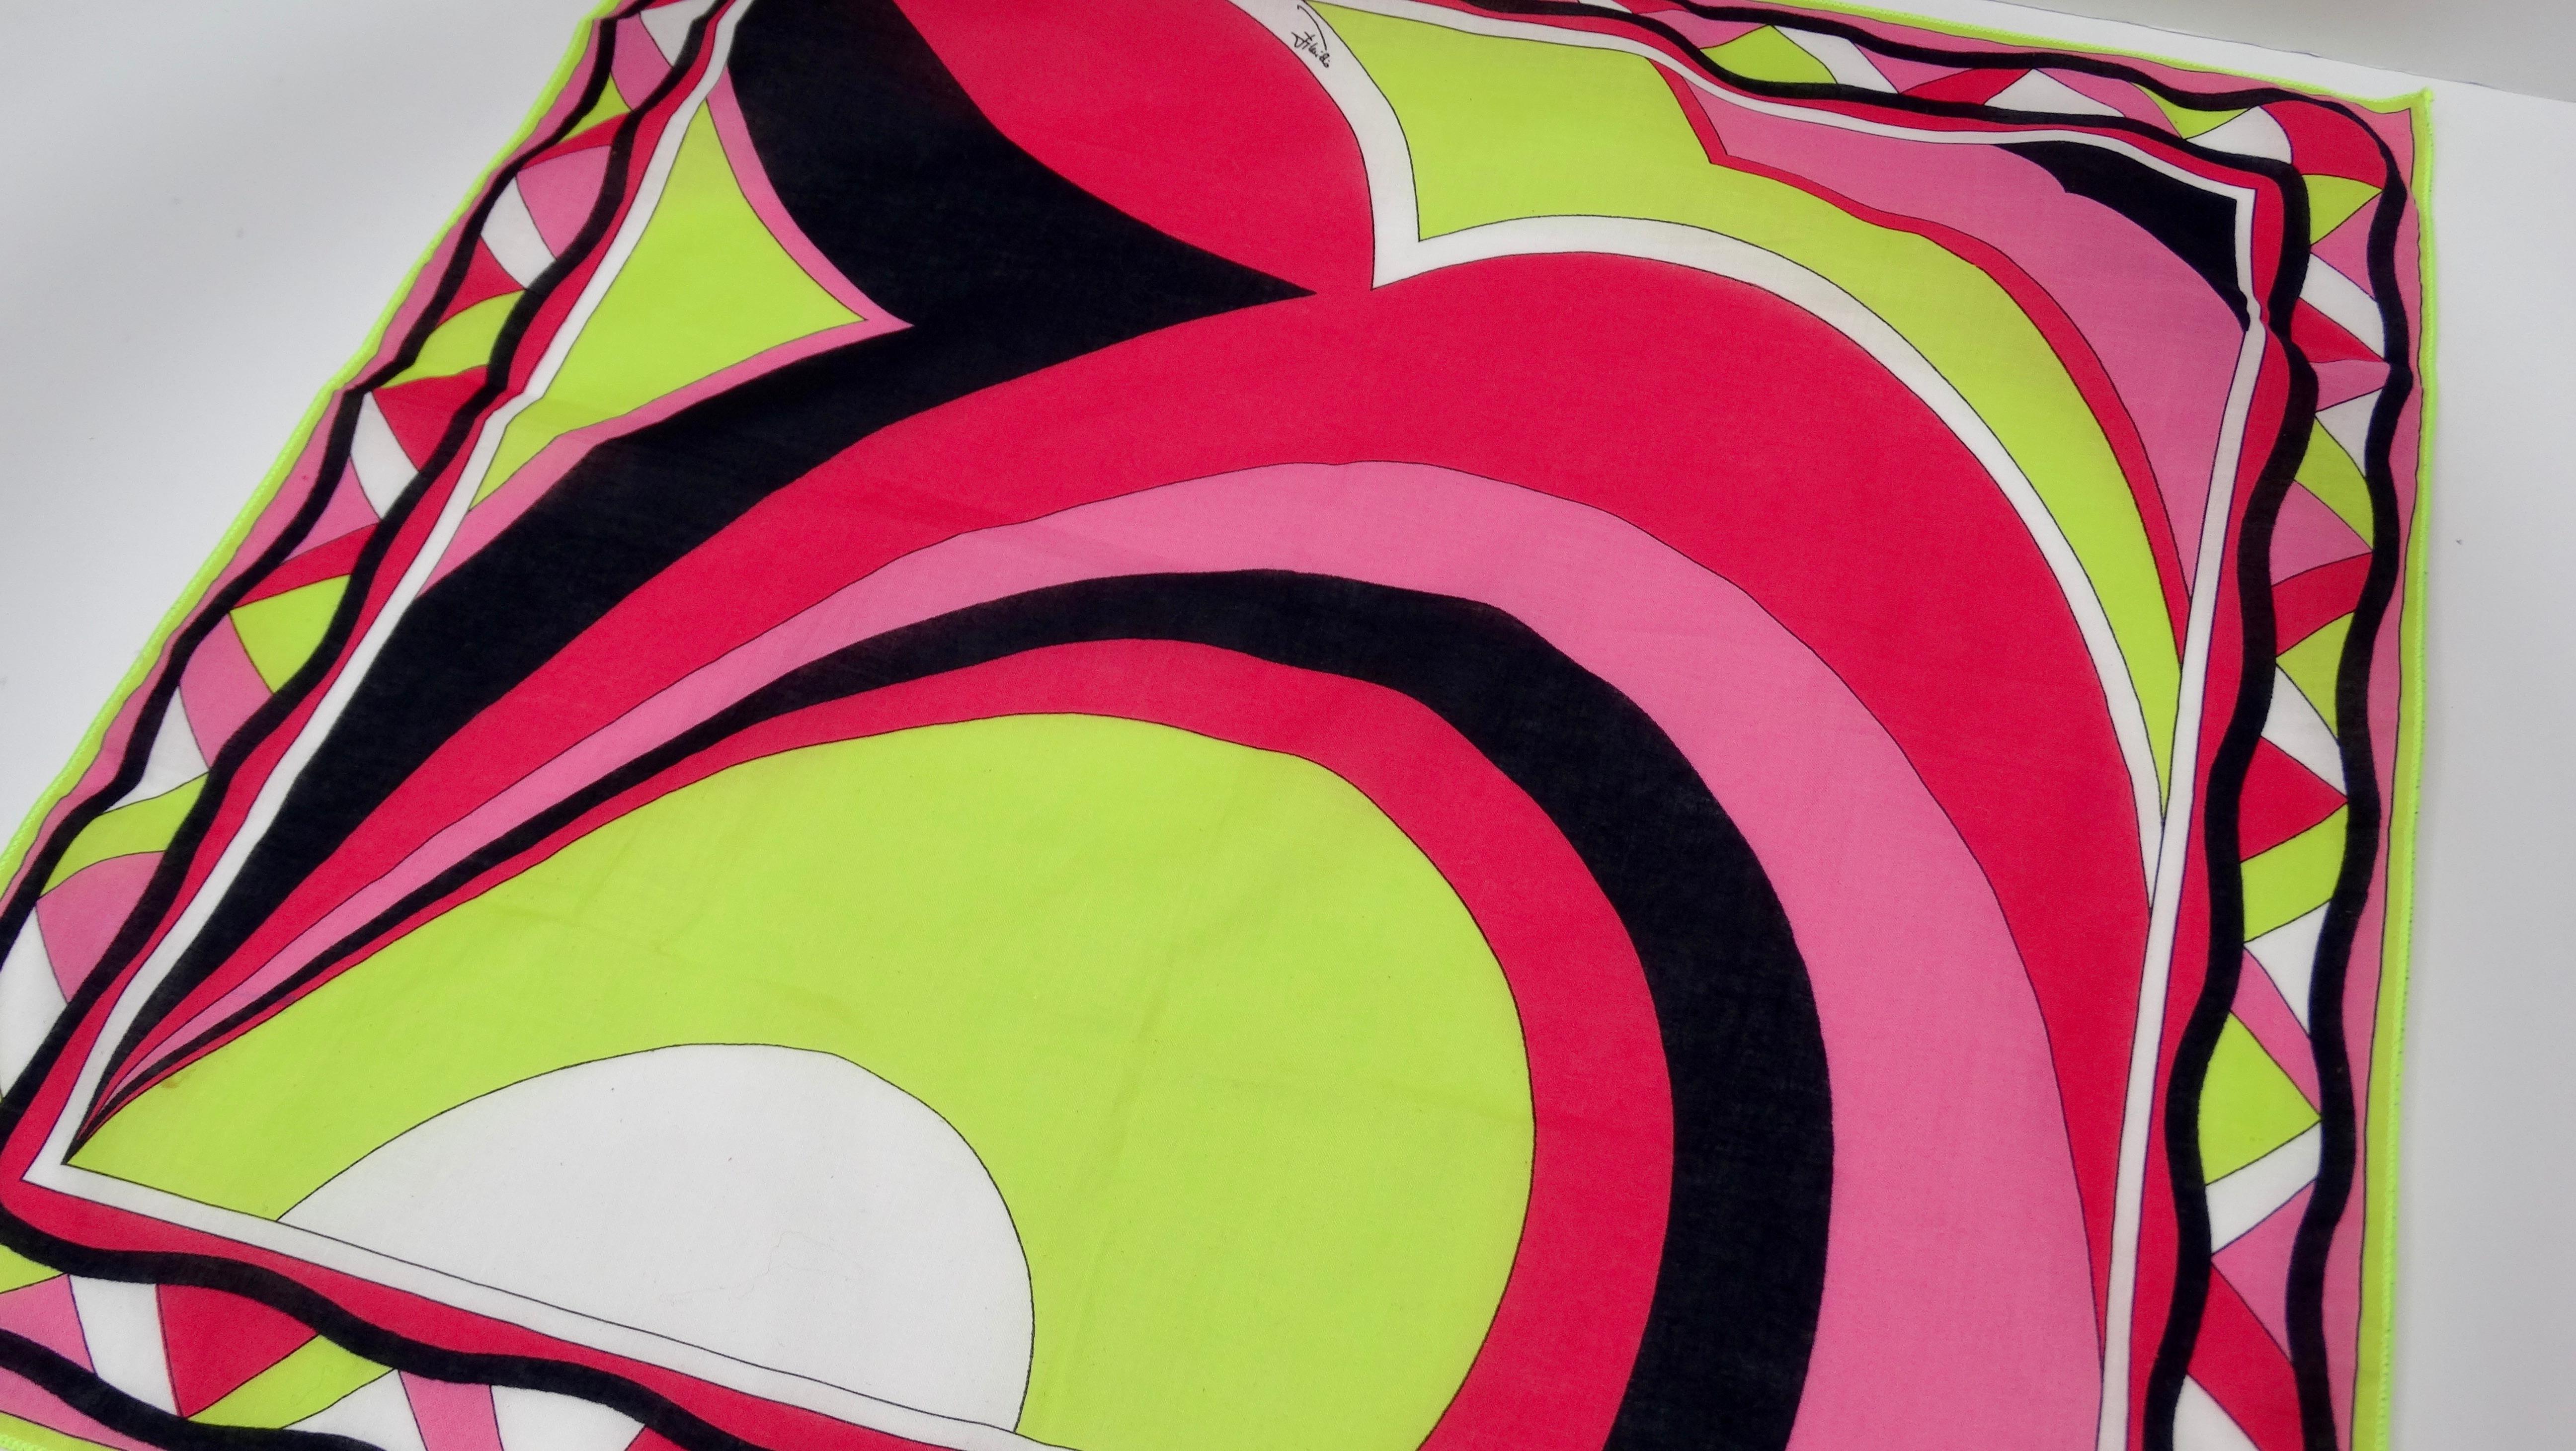 Add this Pucci to your collection! Circa 1960s, this adorable cotton scarf features one of Pucci's signature abstract geometric designs with vibrant colors of contrasting pinks, lime green and black. Geometric trim along the boarder. Emilio Pucci